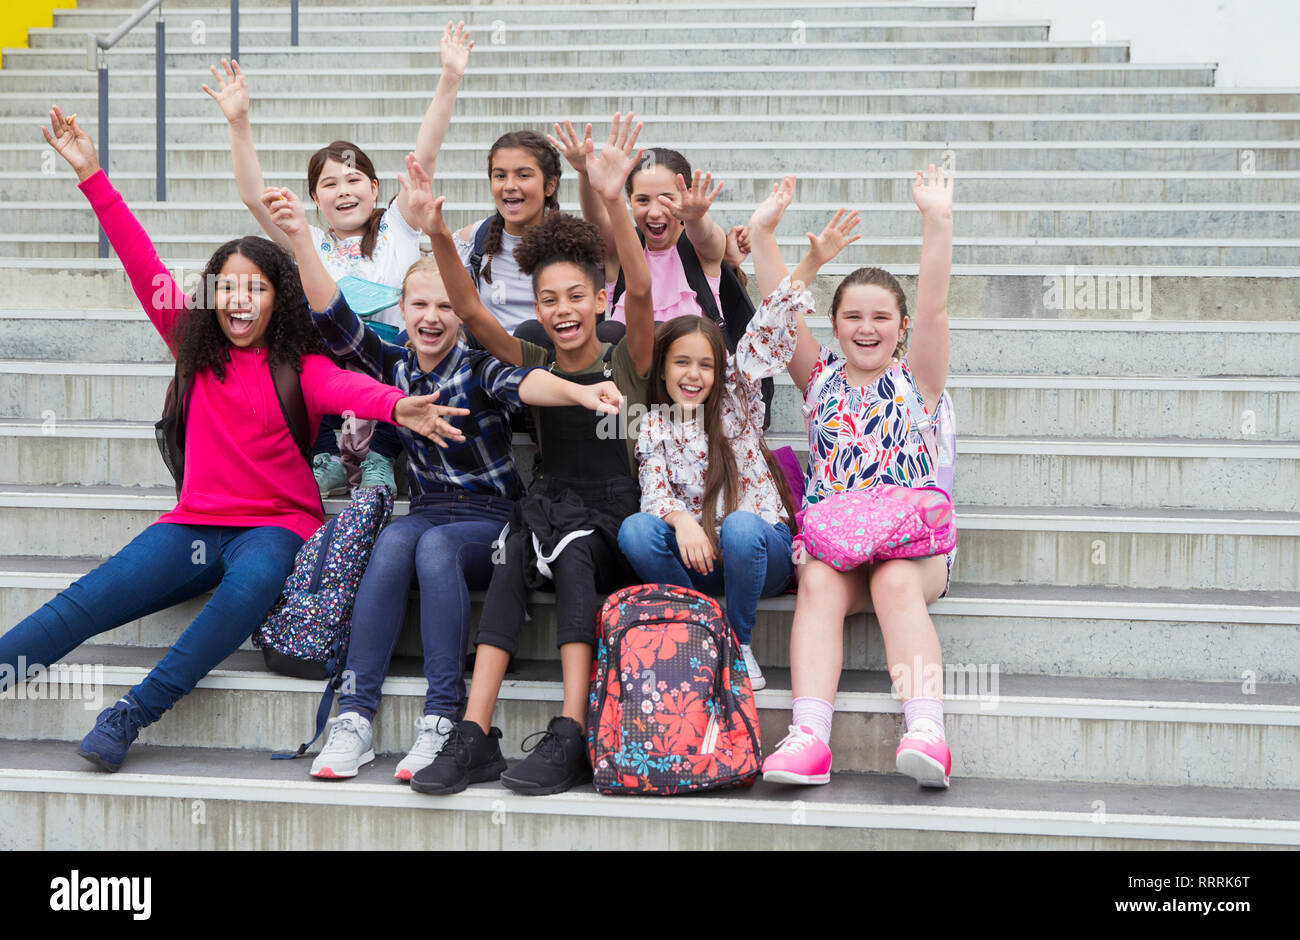 Portrait enthusiastic junior high girl students waving on steps Stock Photo